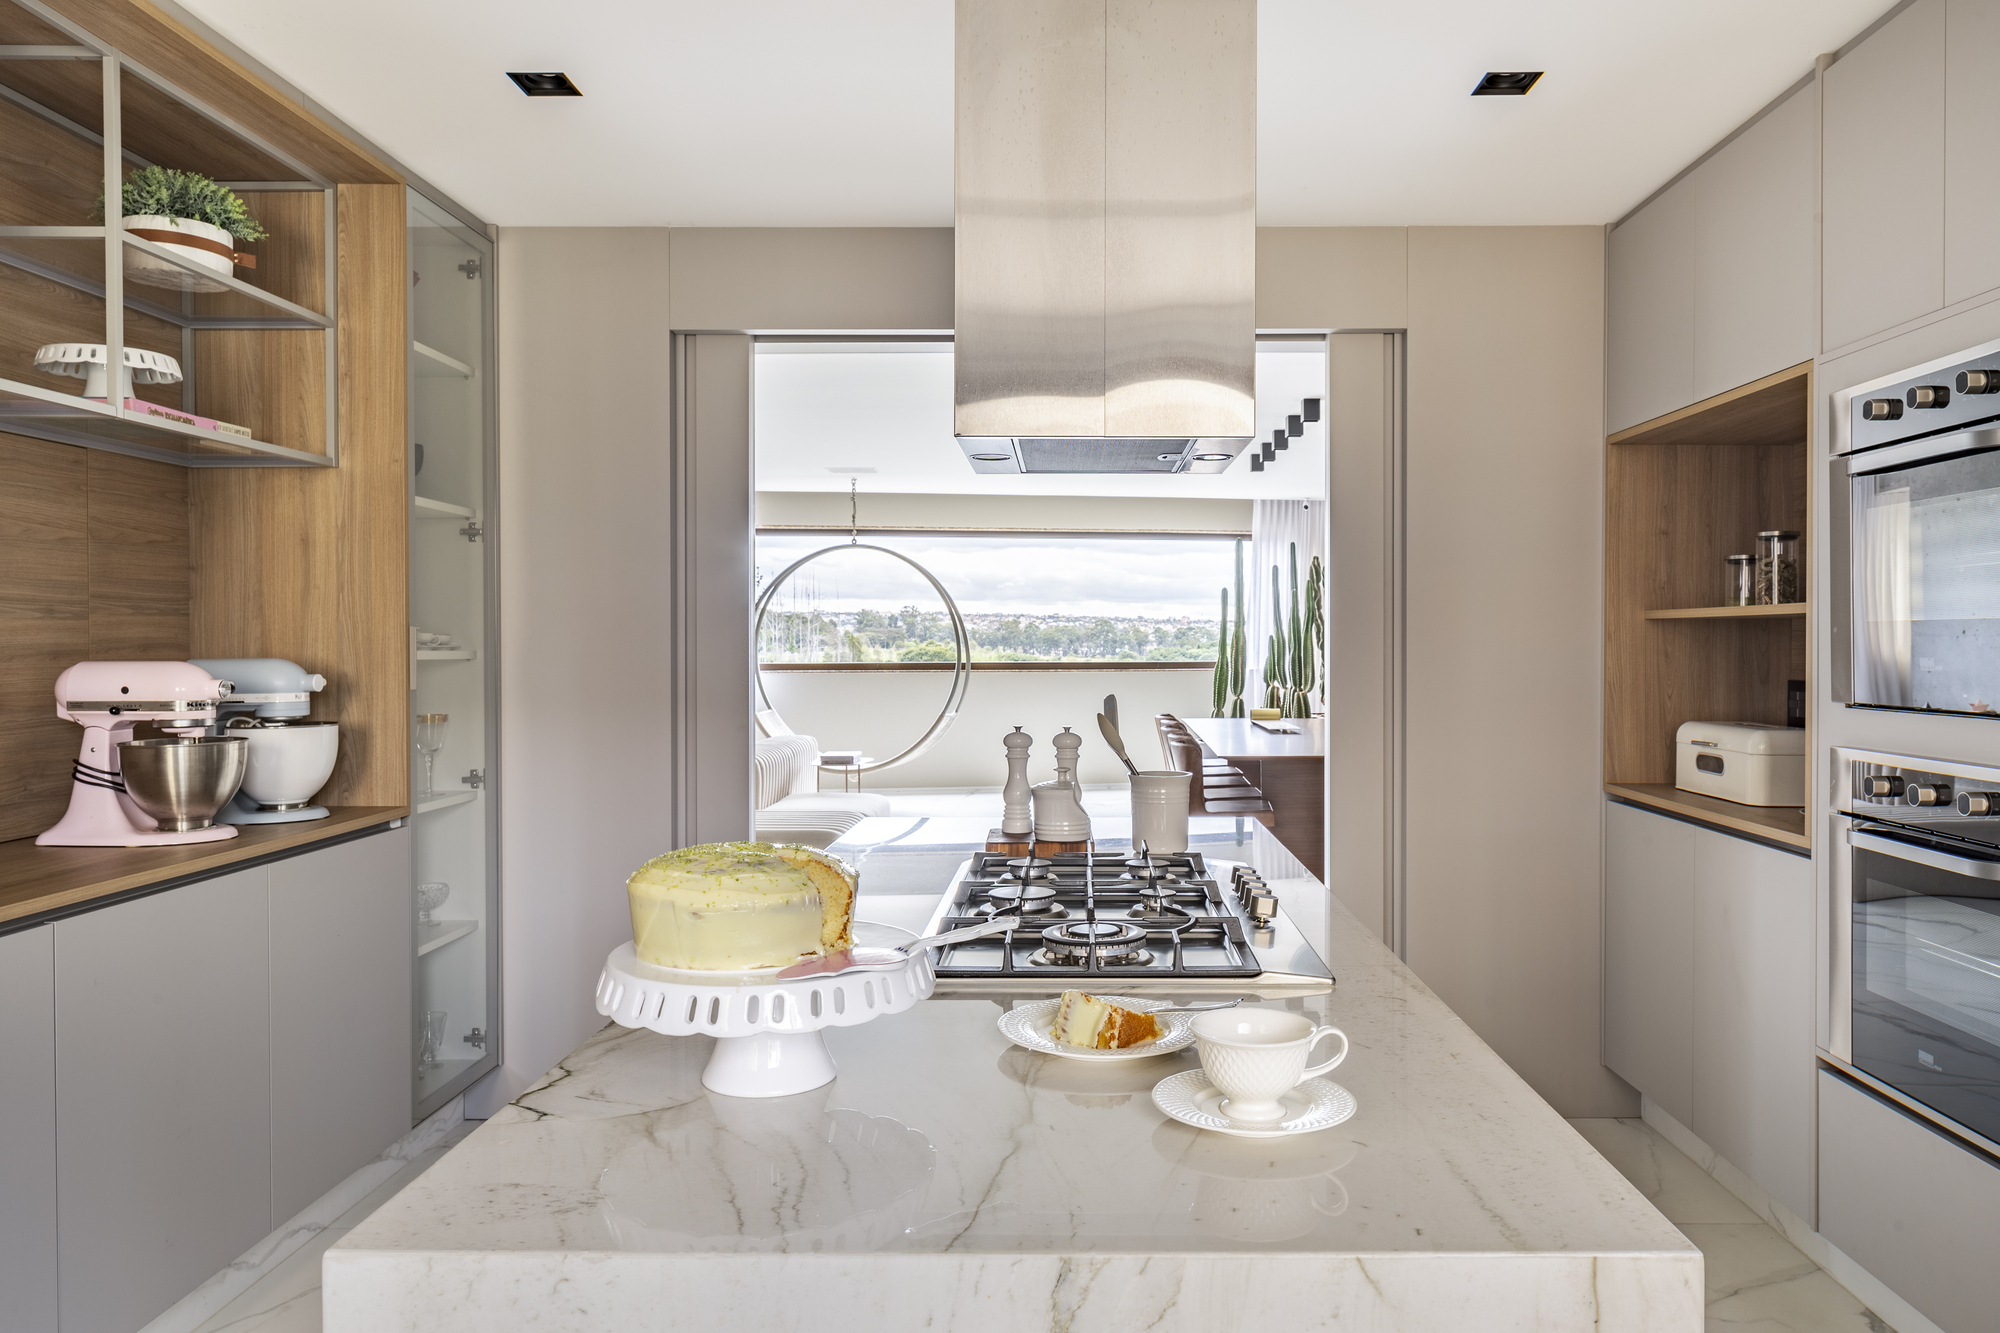 Spacious and stylish modern kitchen in white and wood with a Mont Blanc quartz central island